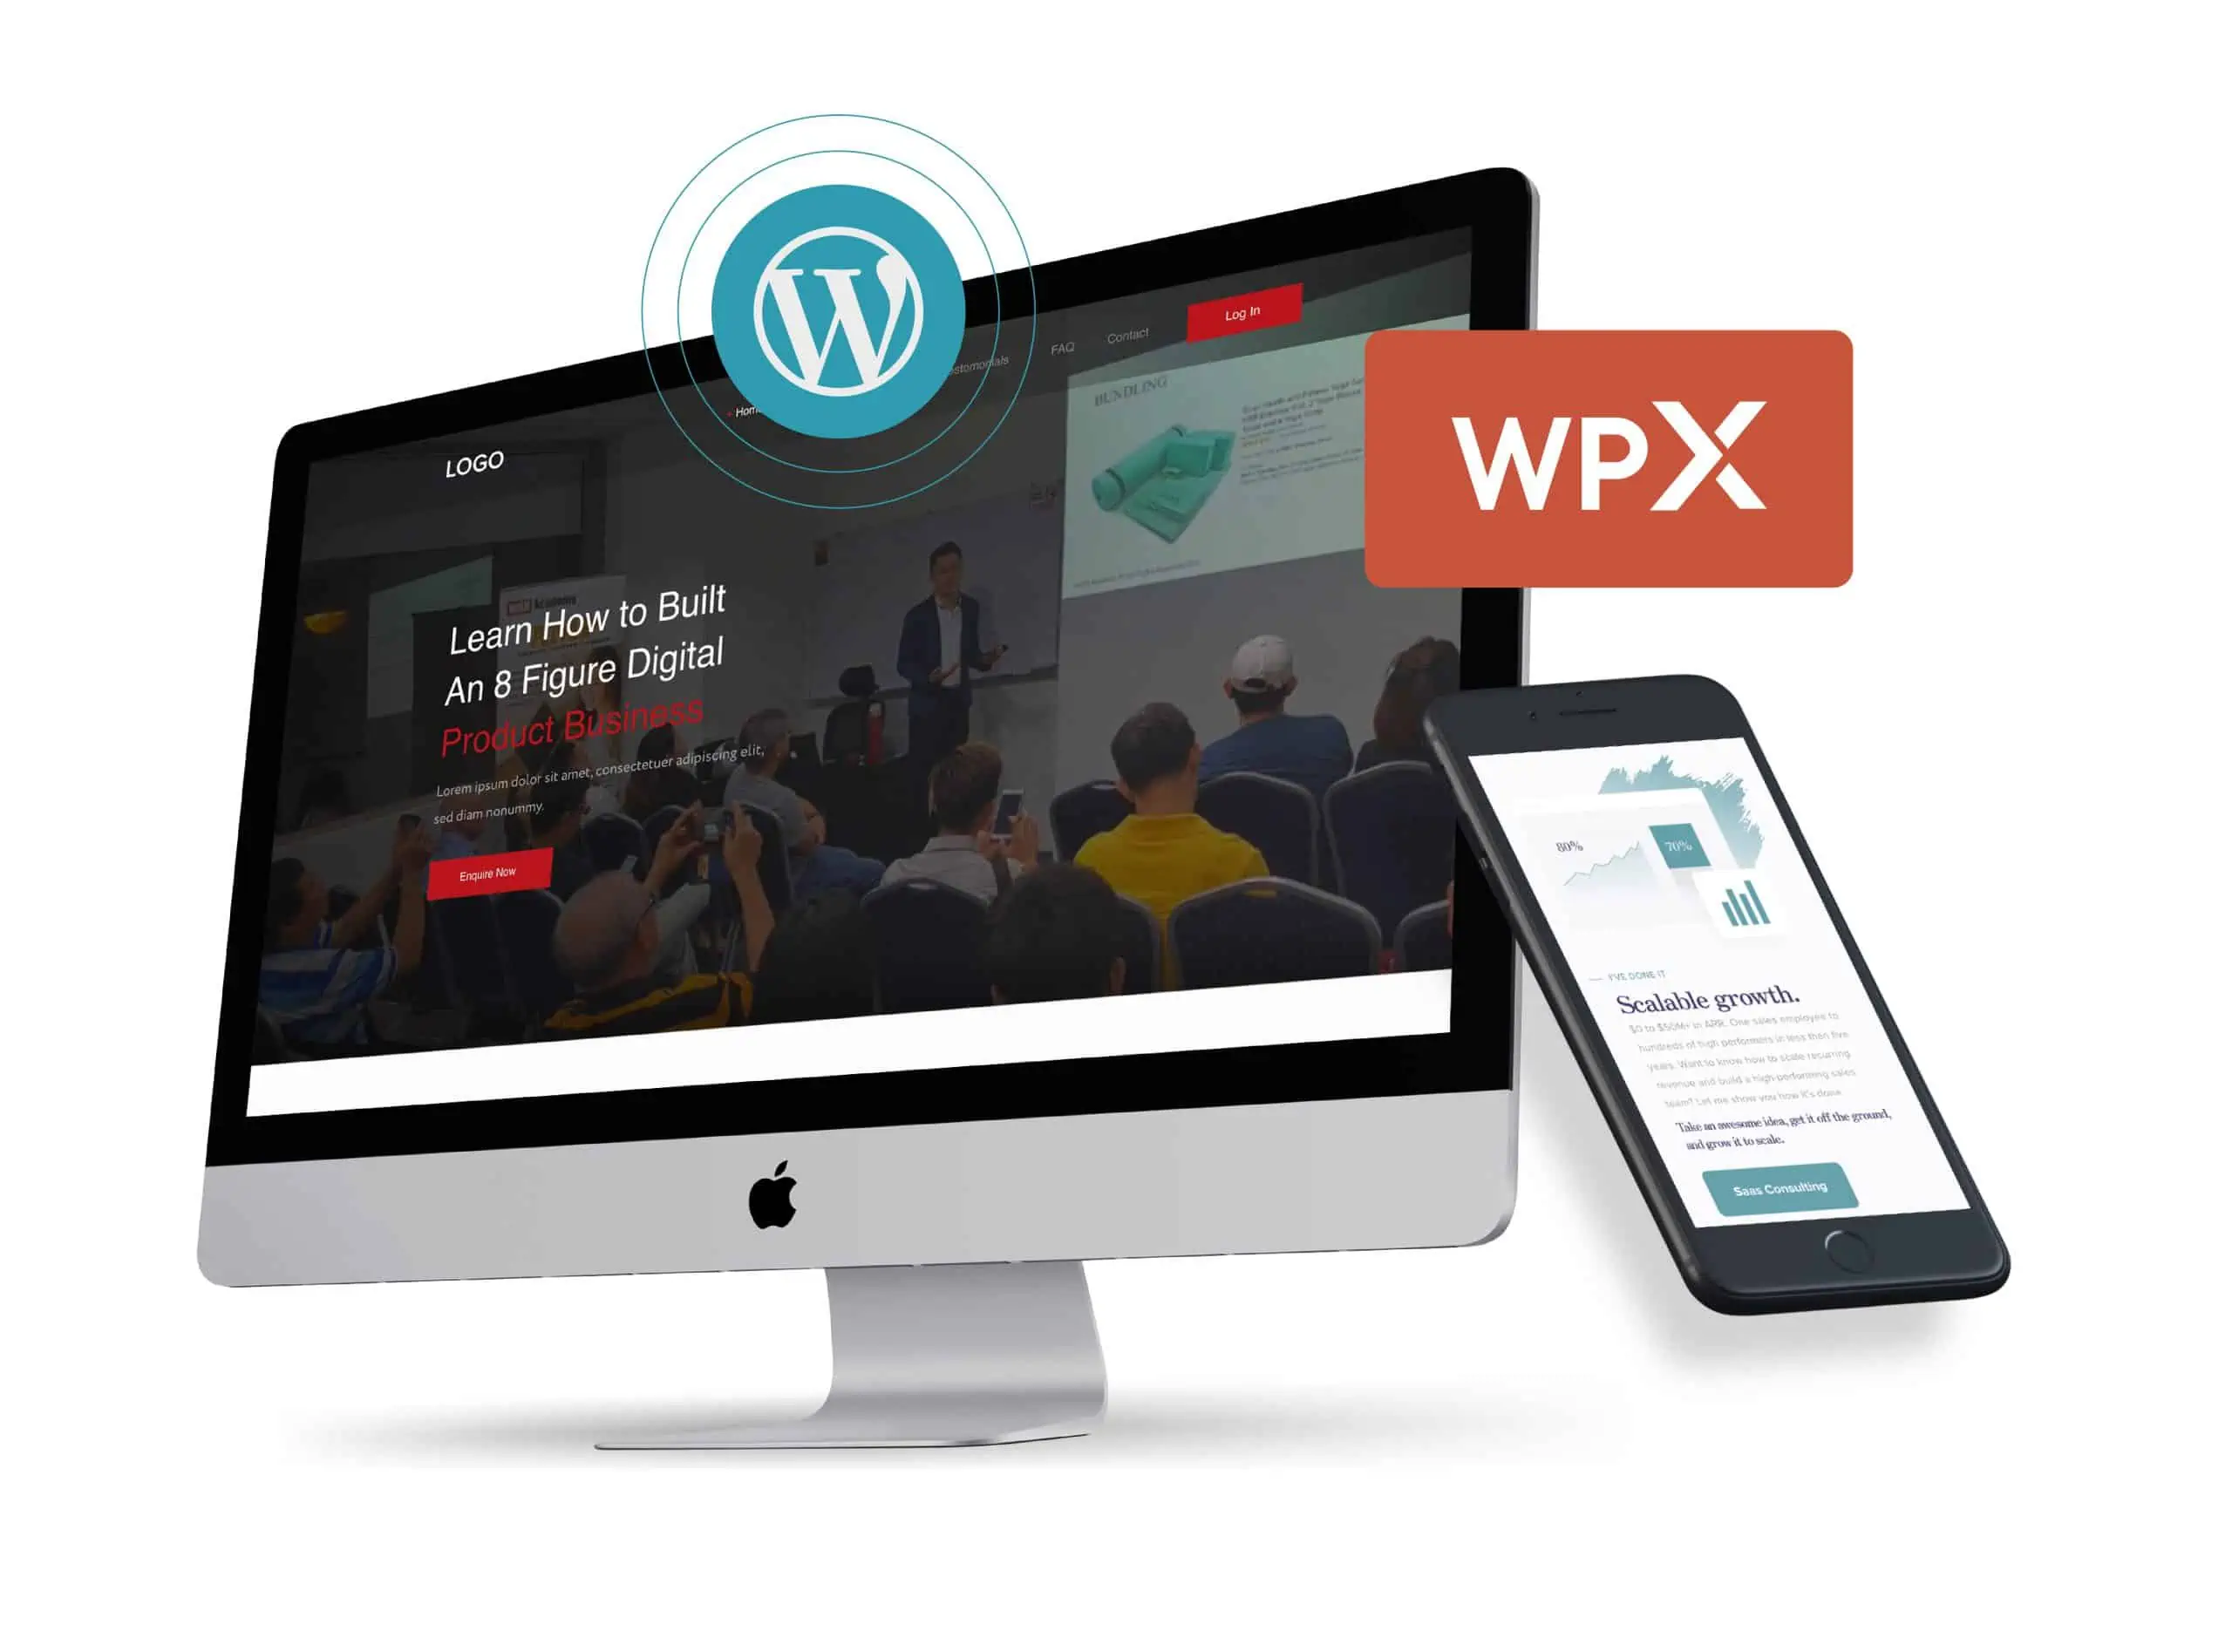 Converting From Concrete5 To Wordpress | WPXStudios